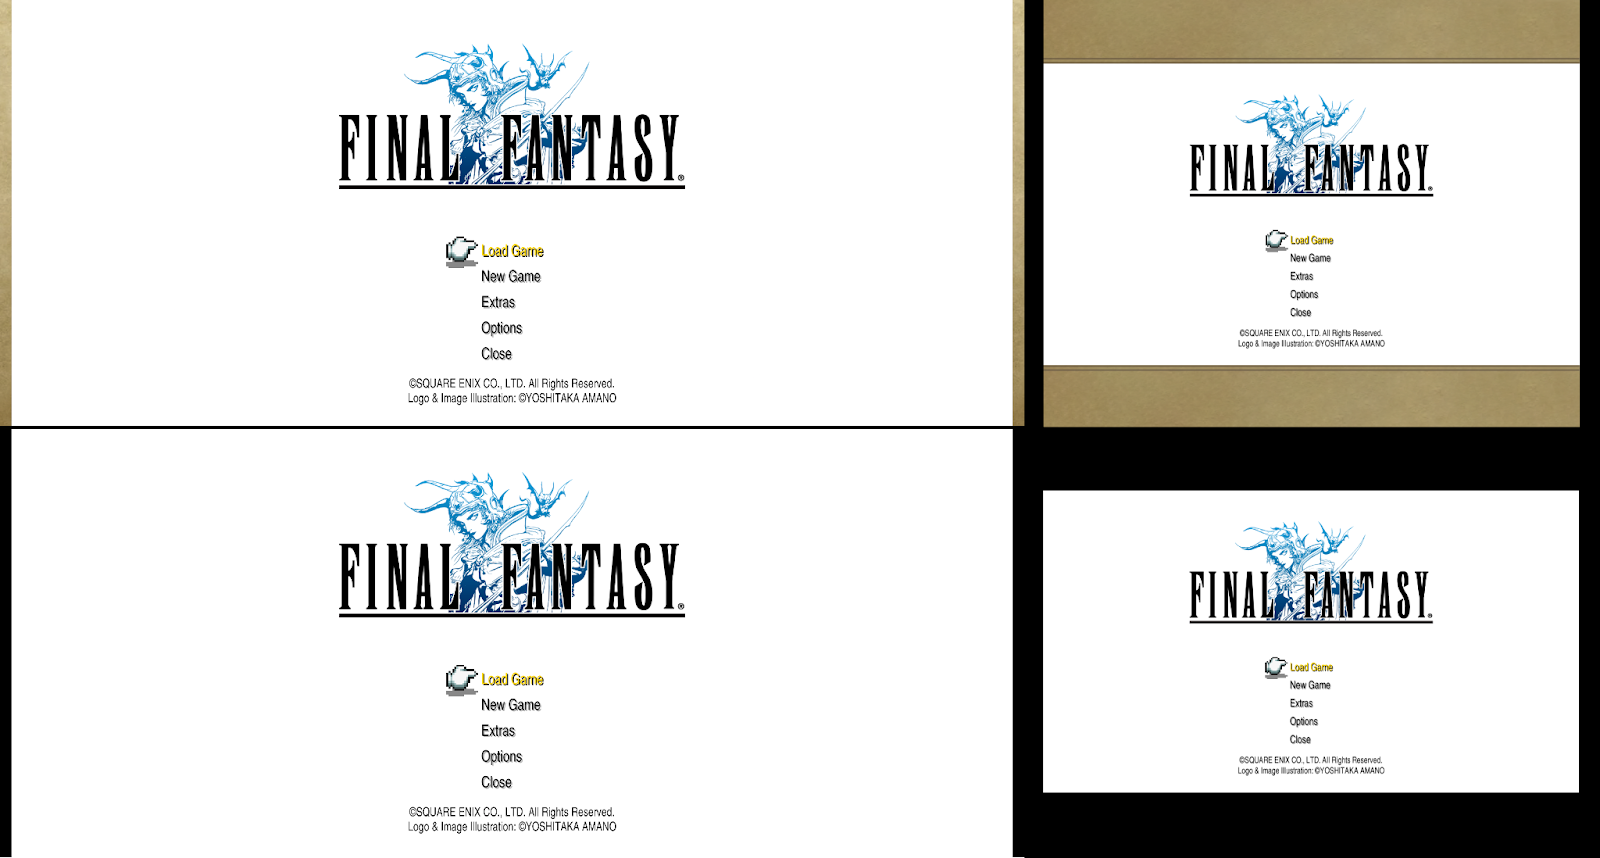 FINAL FANTASY II - Complete Modding Guide and Index - UI Mods: General - FAAFBD9